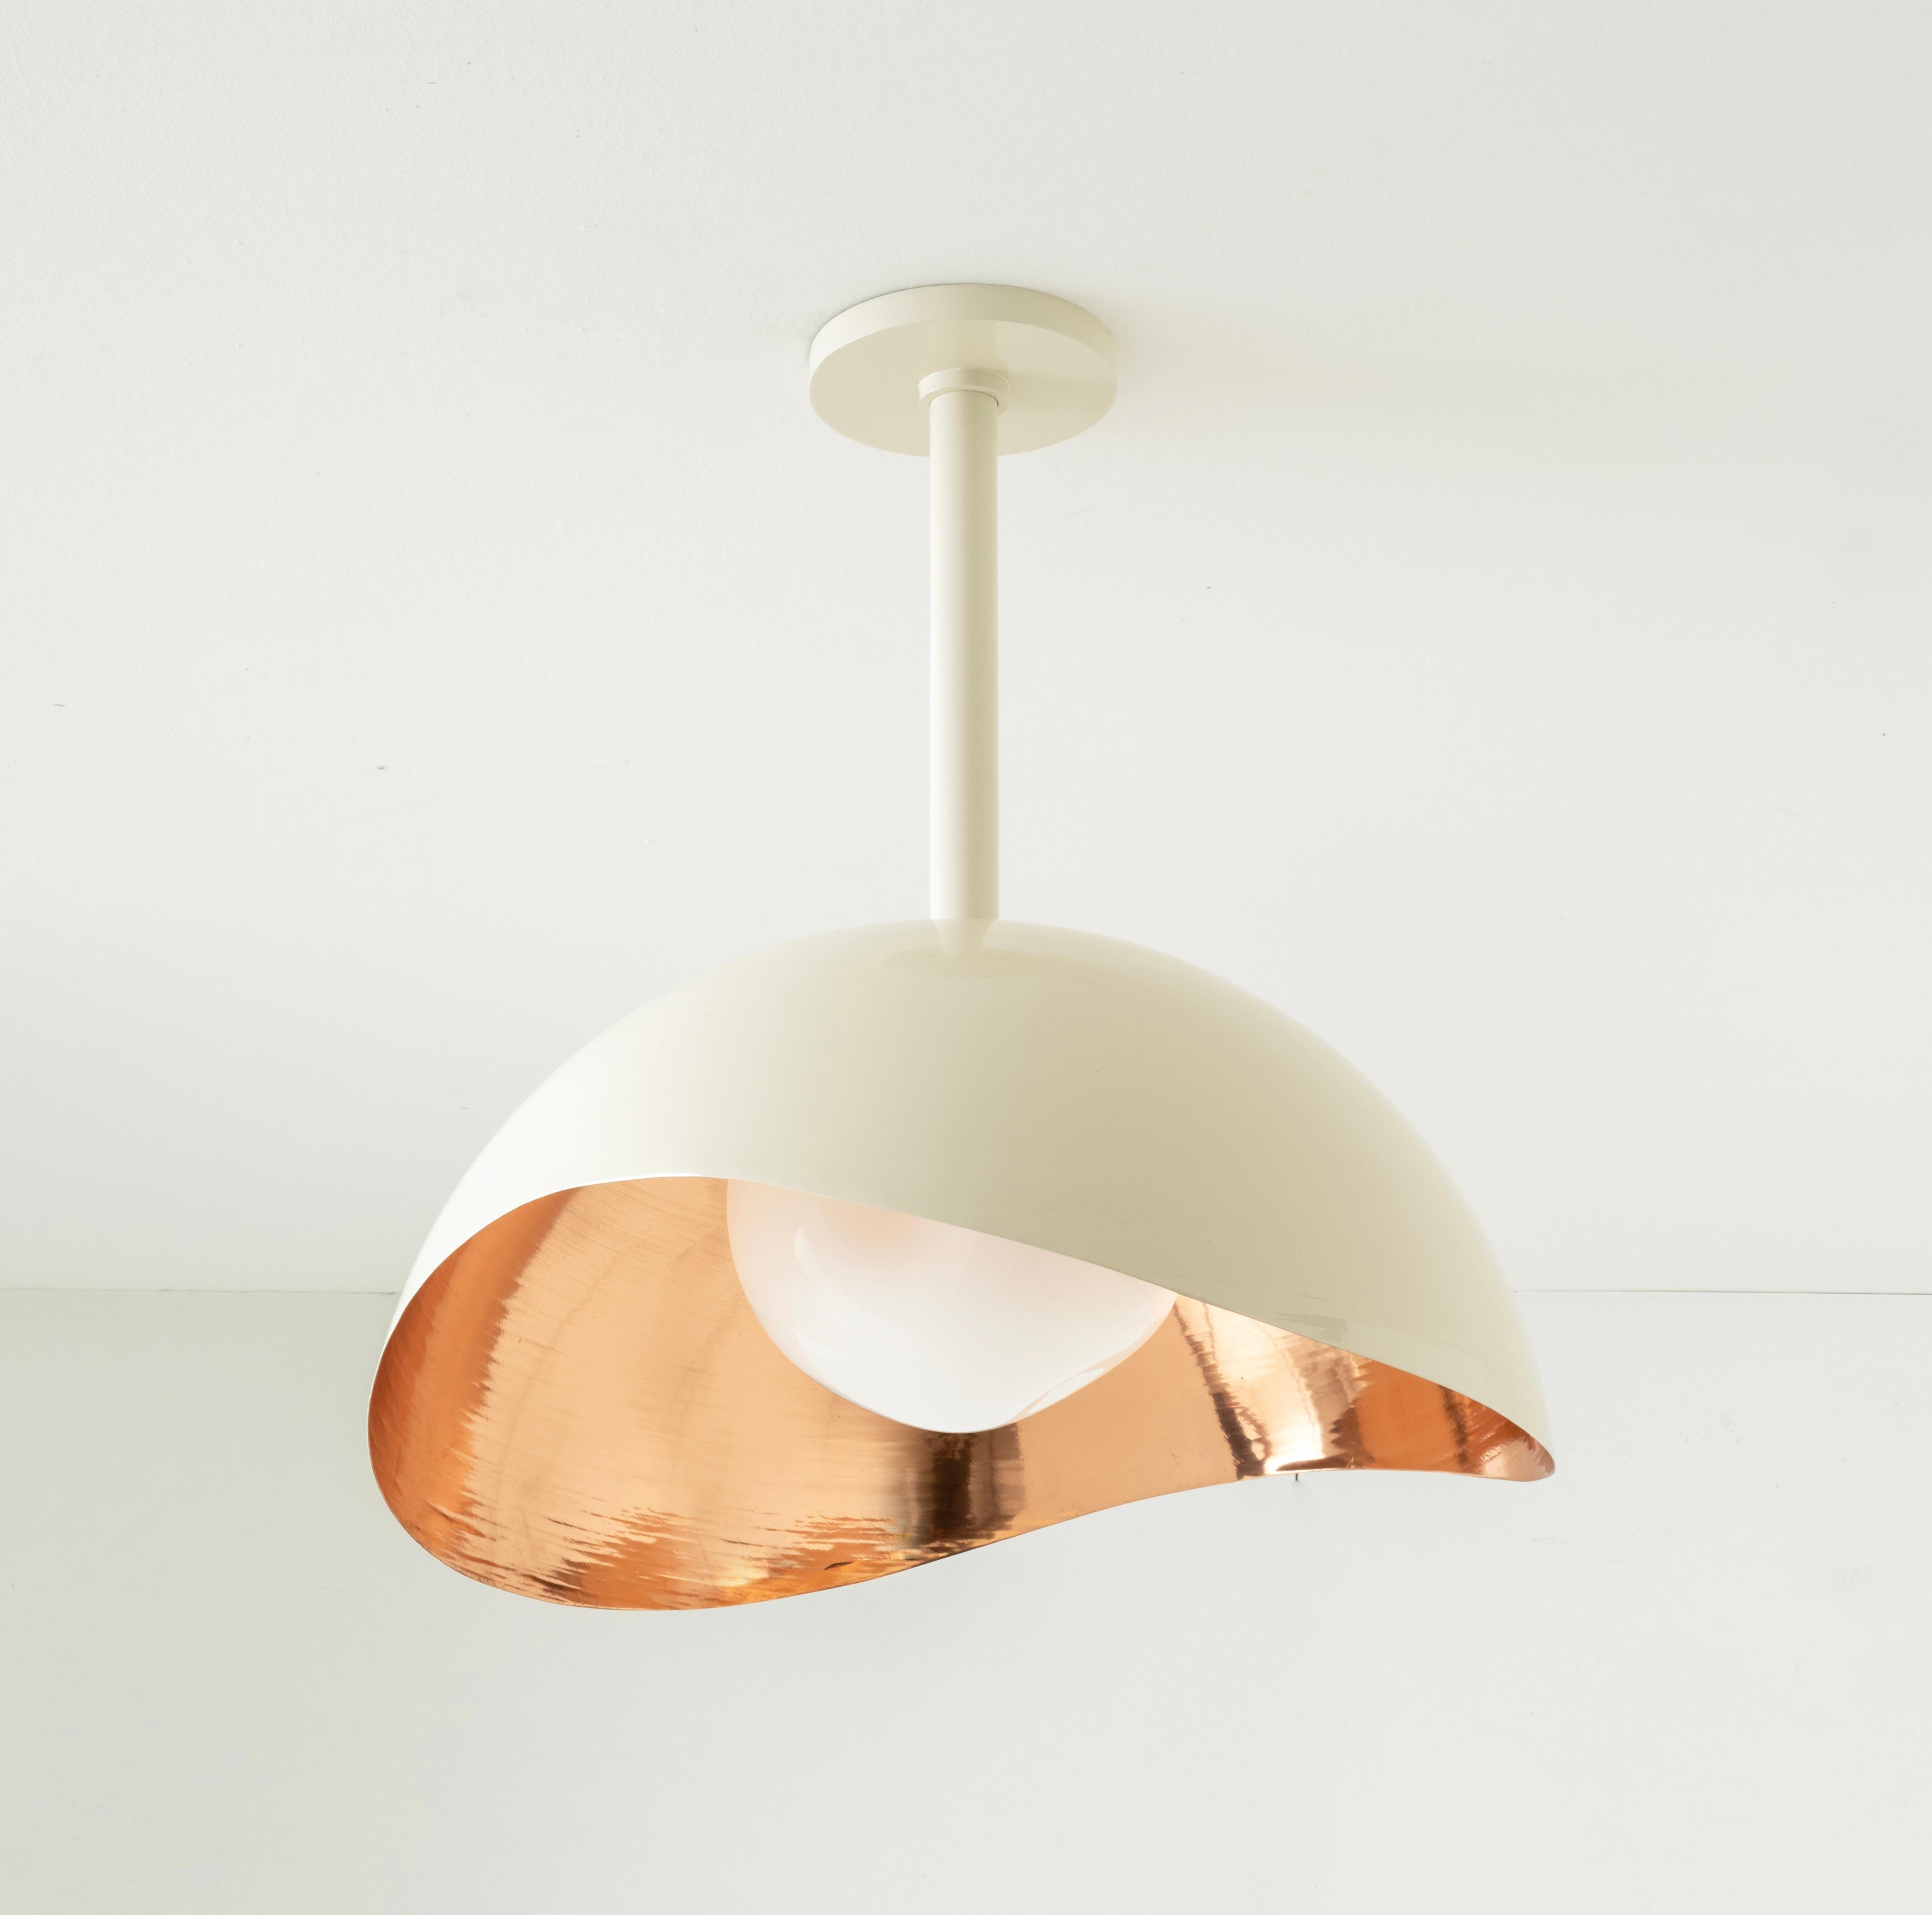 Perla Grande Ceiling Light - Copper Interior and Enamel Exterior In New Condition For Sale In New York, NY